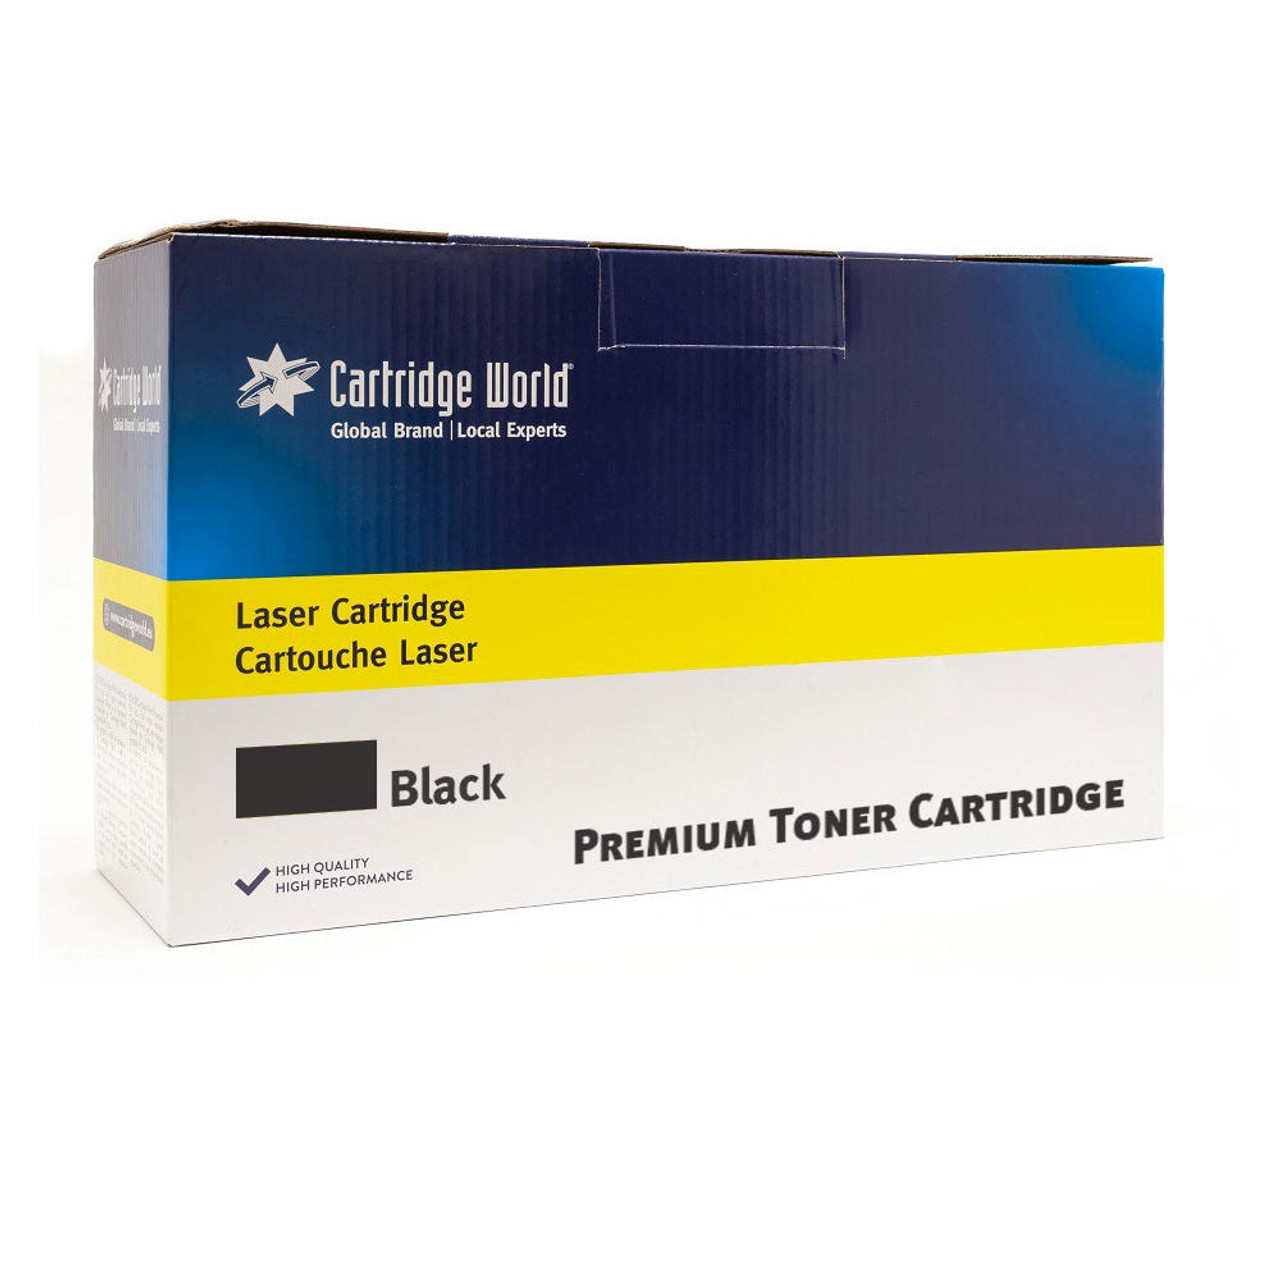 4 Compatible Toners, Brother TN-2410 / TN-2420 Black ~ 3.000 Pages